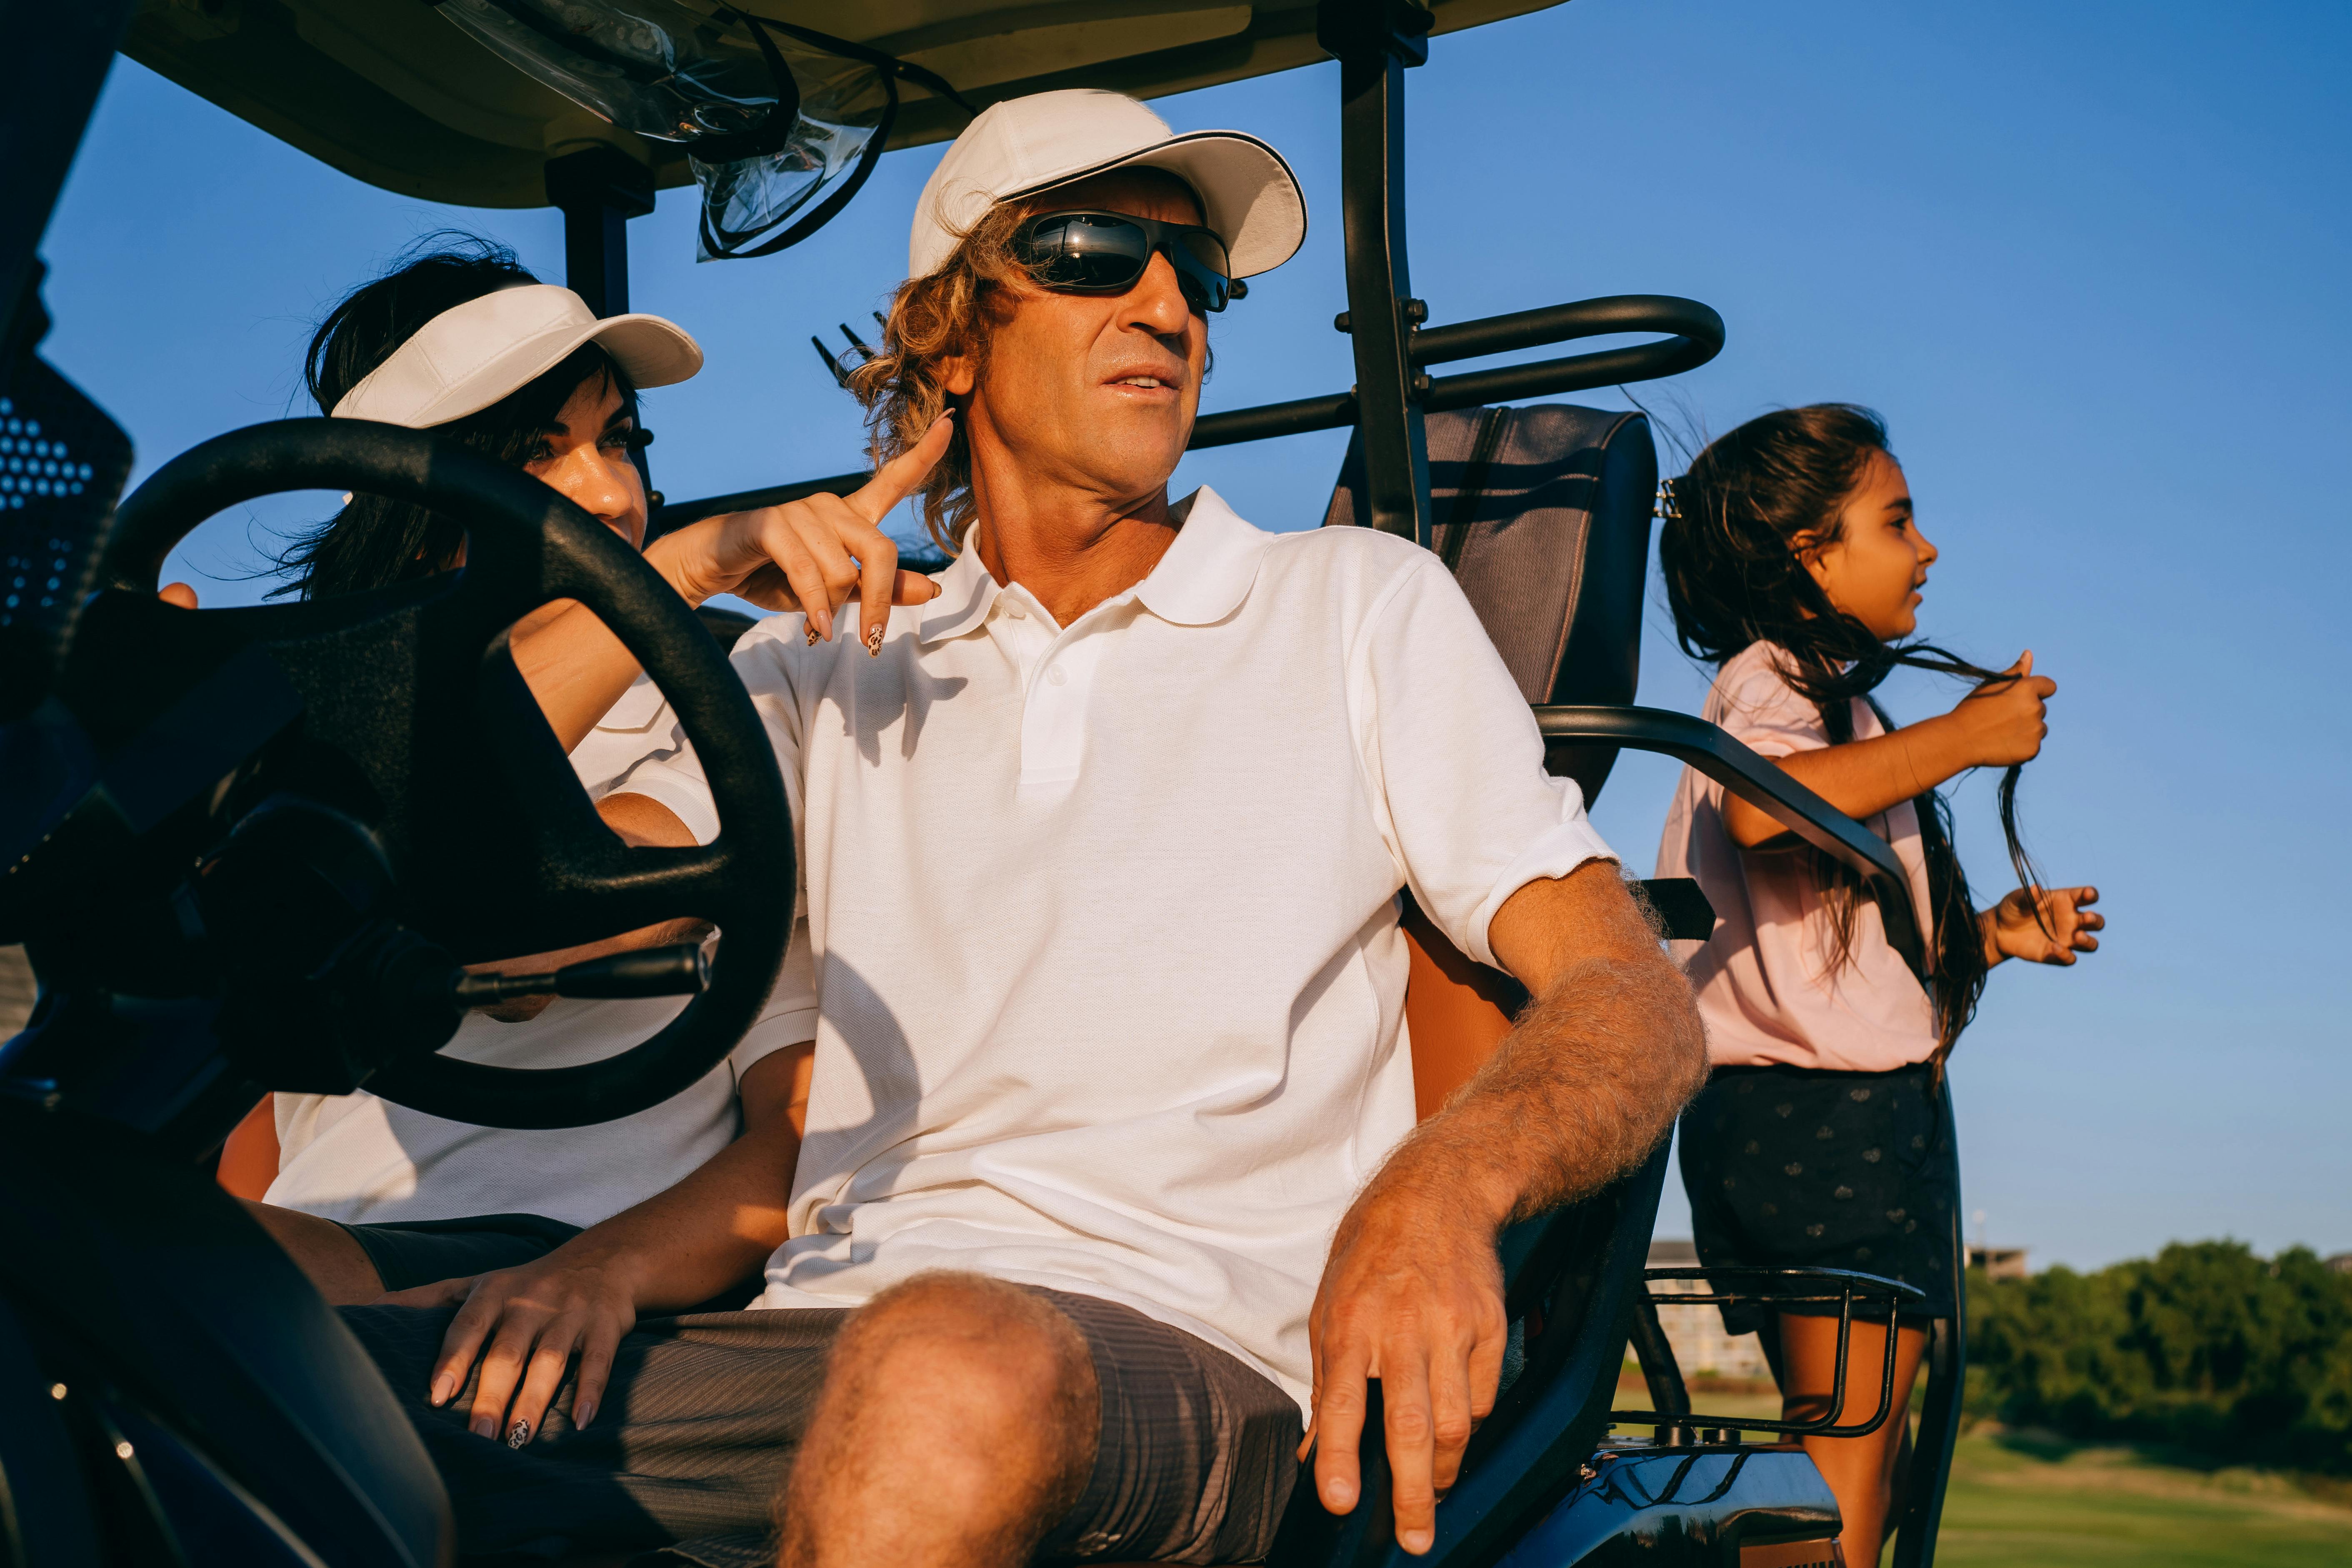 a man in white polo shirt and hat riding a golf cart with woman and a girl